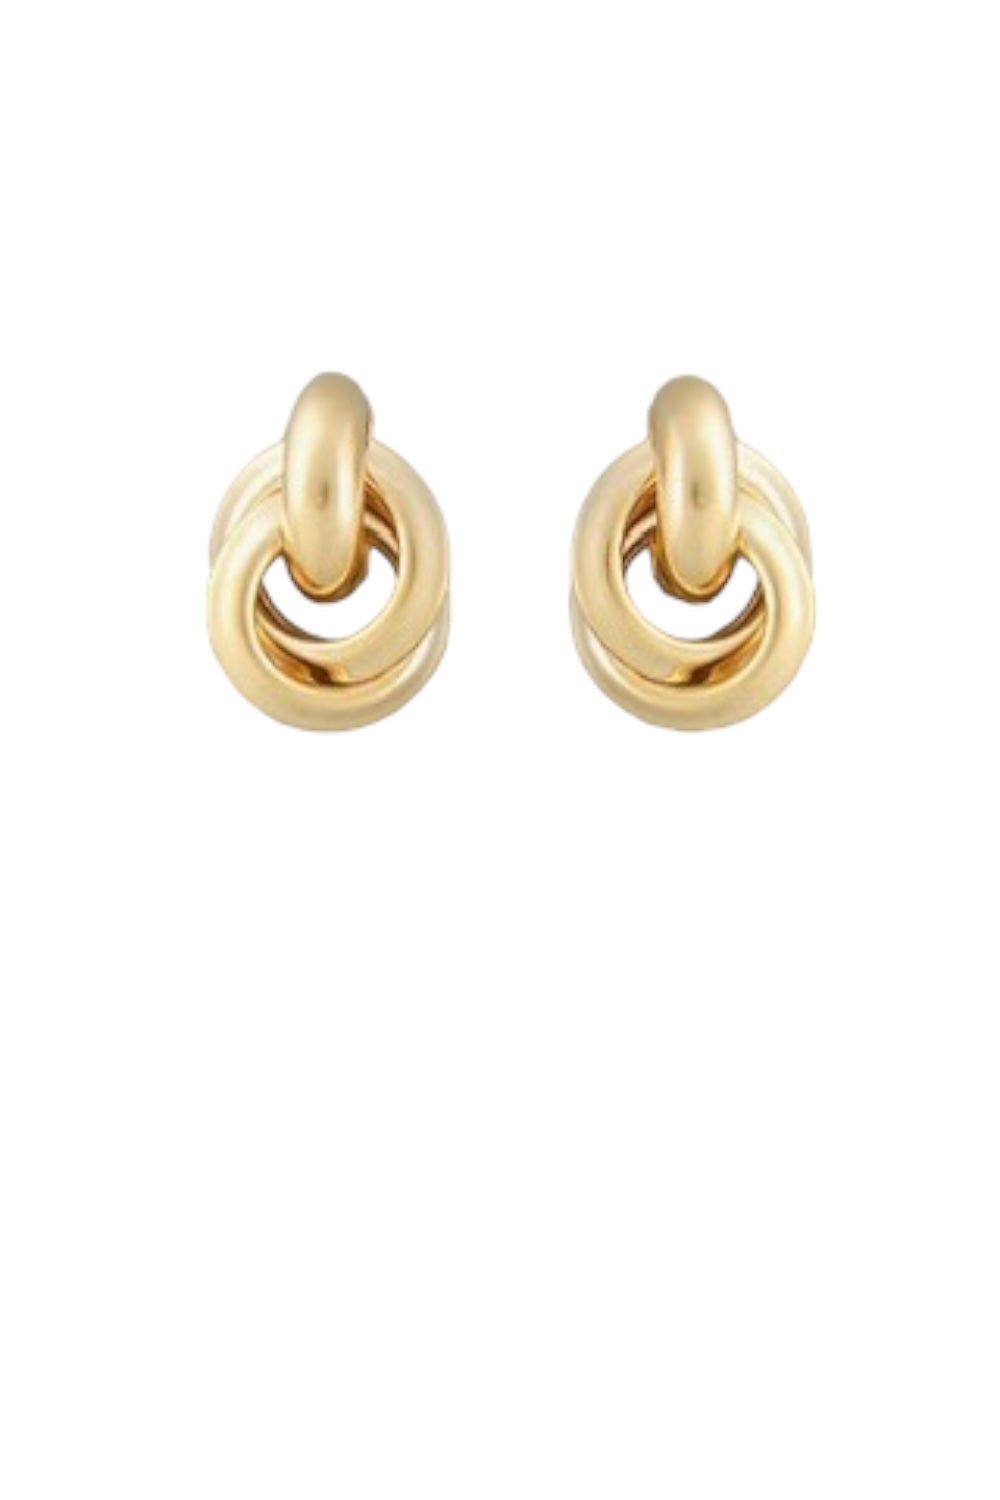 Gold Love Knot Studs